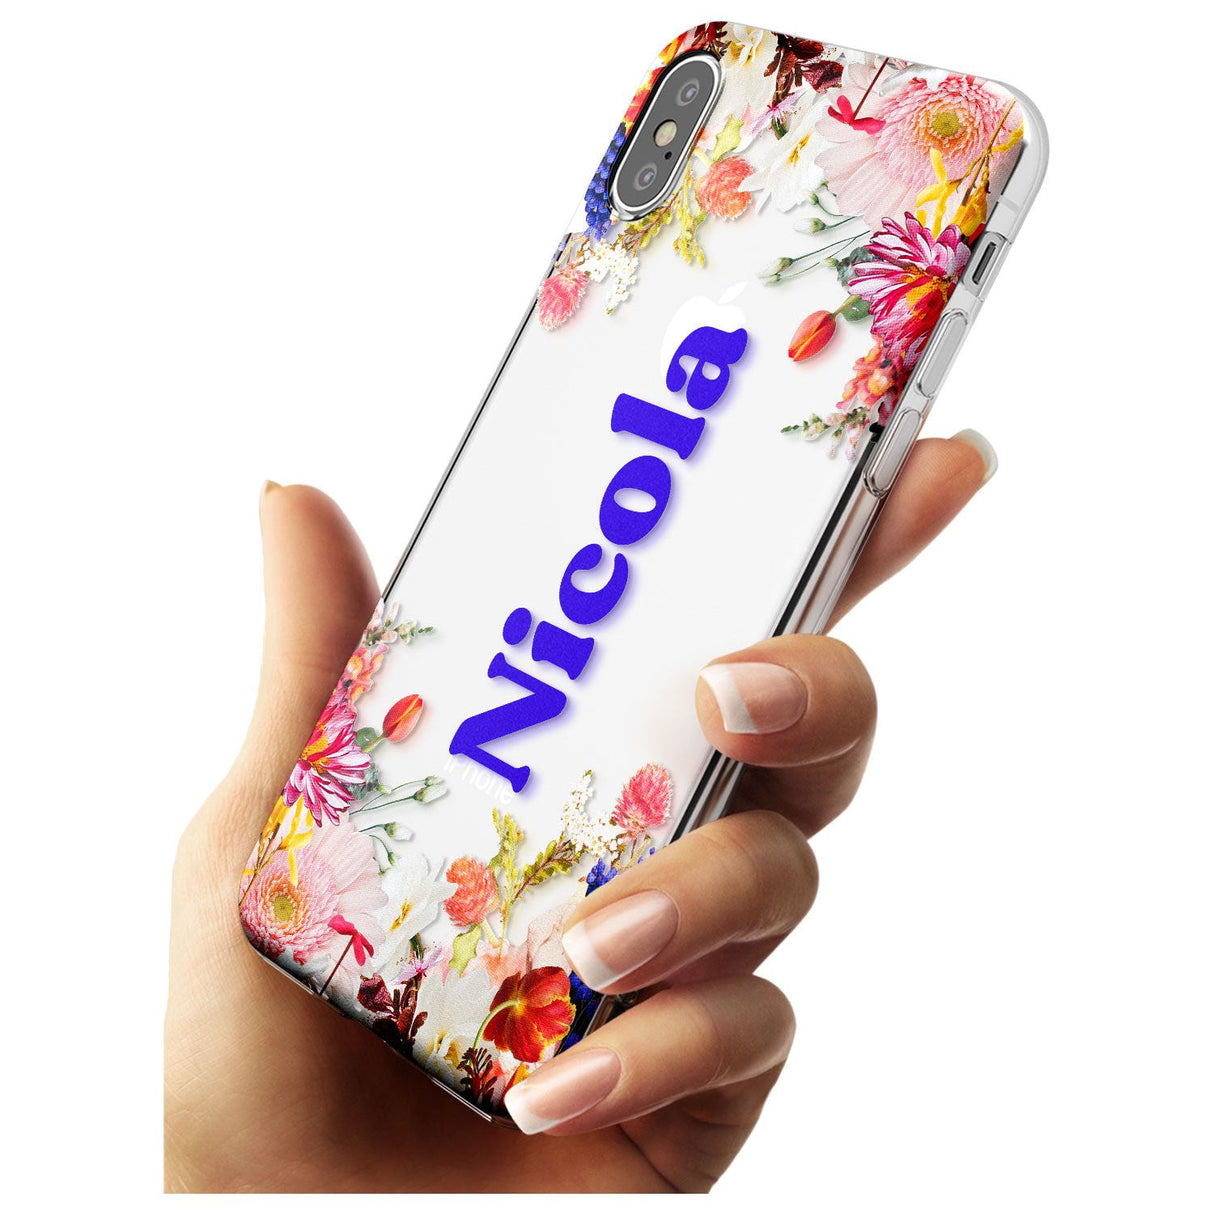 Custom Text with Floral Borders Black Impact Phone Case for iPhone X XS Max XR